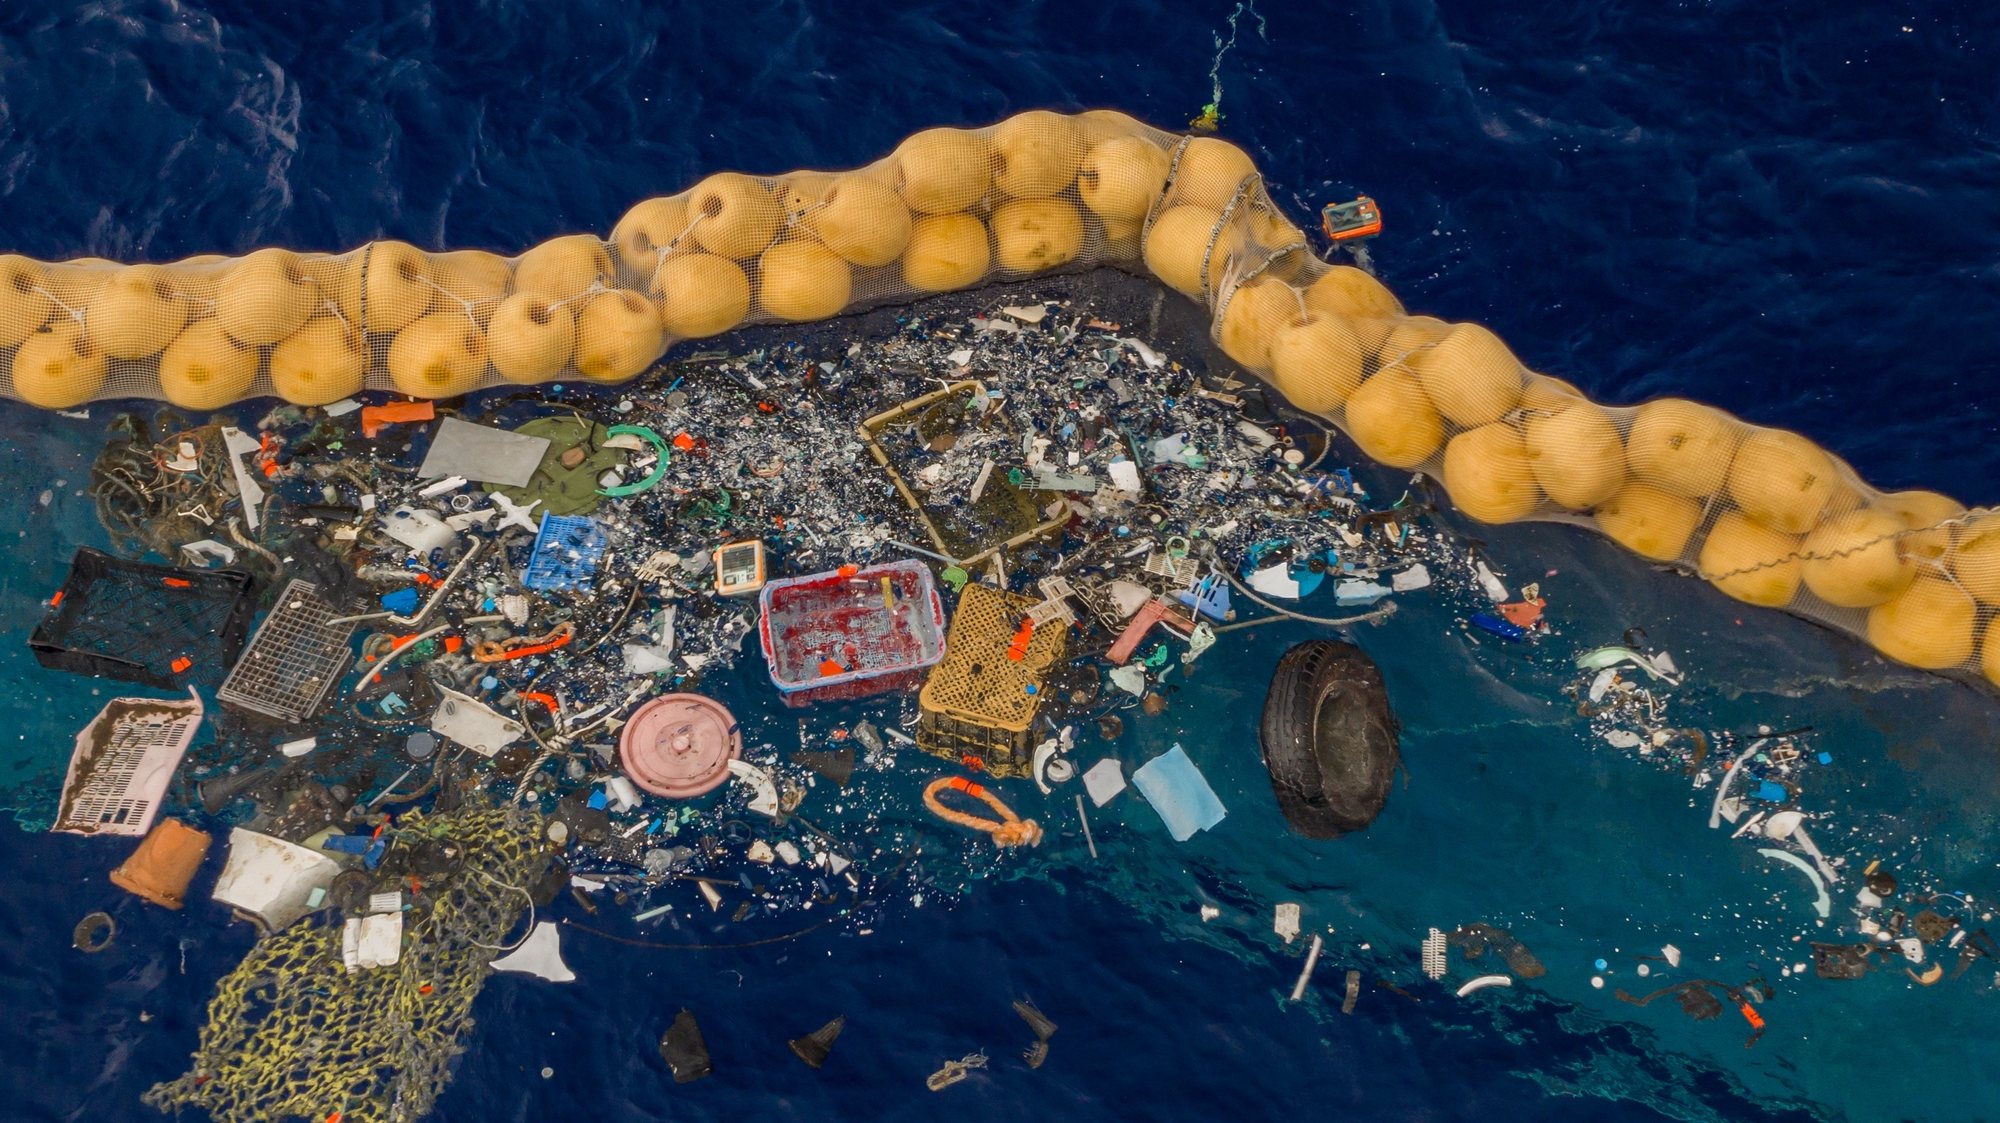 epa07892087 A handout photo made available by The Ocean Cleanup shows the company&#039;s ocean cleanup prototype System 001/B capturing plastic debris in the Great Pacific Garbage Patch, in the Pacific Ocean, 30 September 2019 (issued 03 October 2019). The self-contained system uses natural currents of the sea to passively collect plastic debris in an effort to reduce waste in the ocean. According to the Ocean Cleanup, the system is also able to filter microplastics as small as 1mm.  EPA/THE OCEAN CLEANUP HANDOUT  HANDOUT EDITORIAL USE ONLY/NO SALES